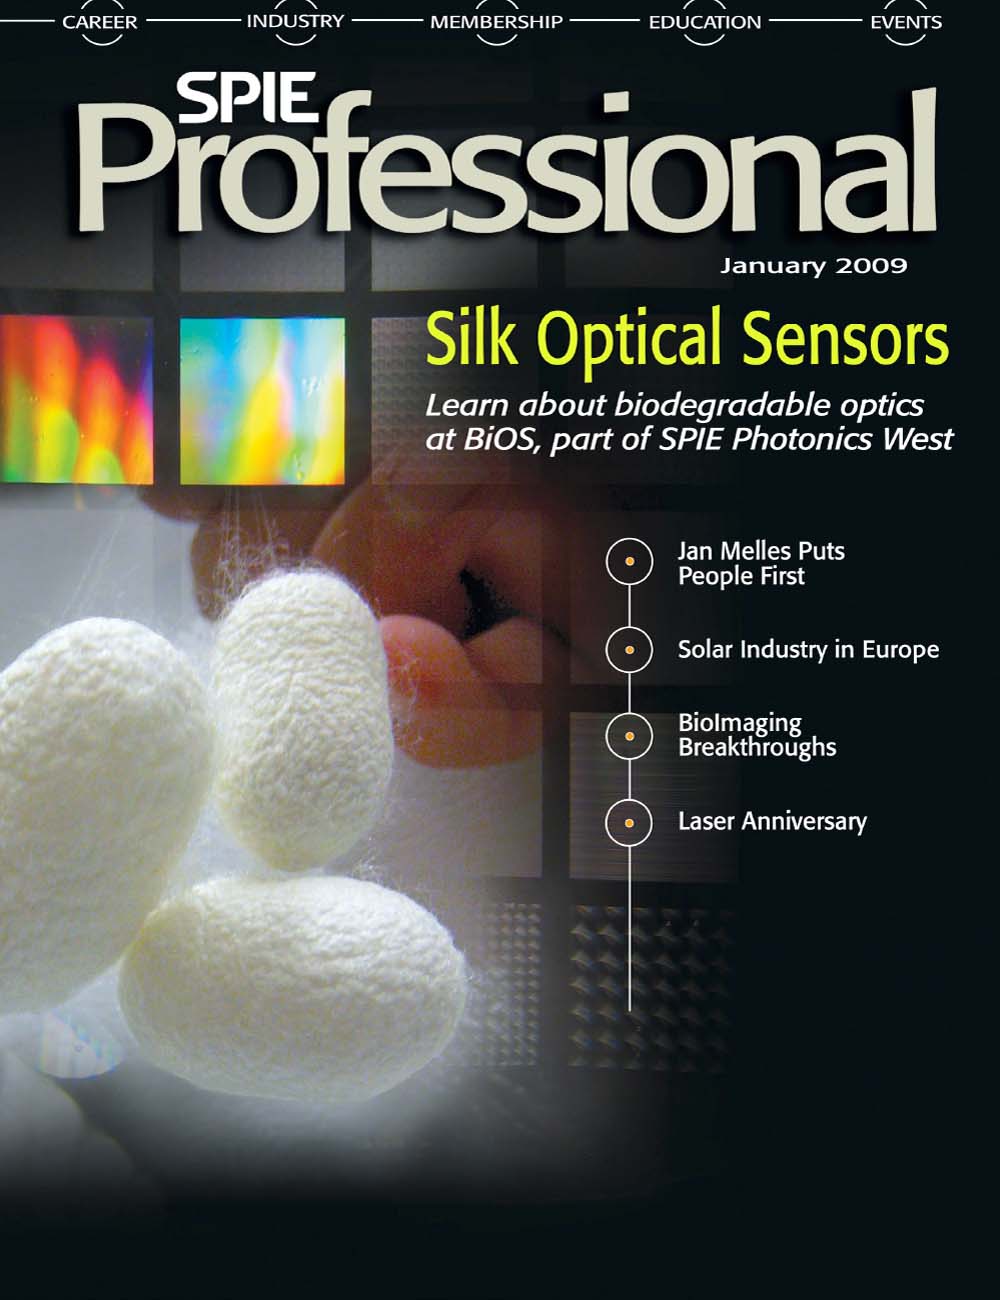 January 2009 Cover of SPIE Professional, Volume 4, Issue 1